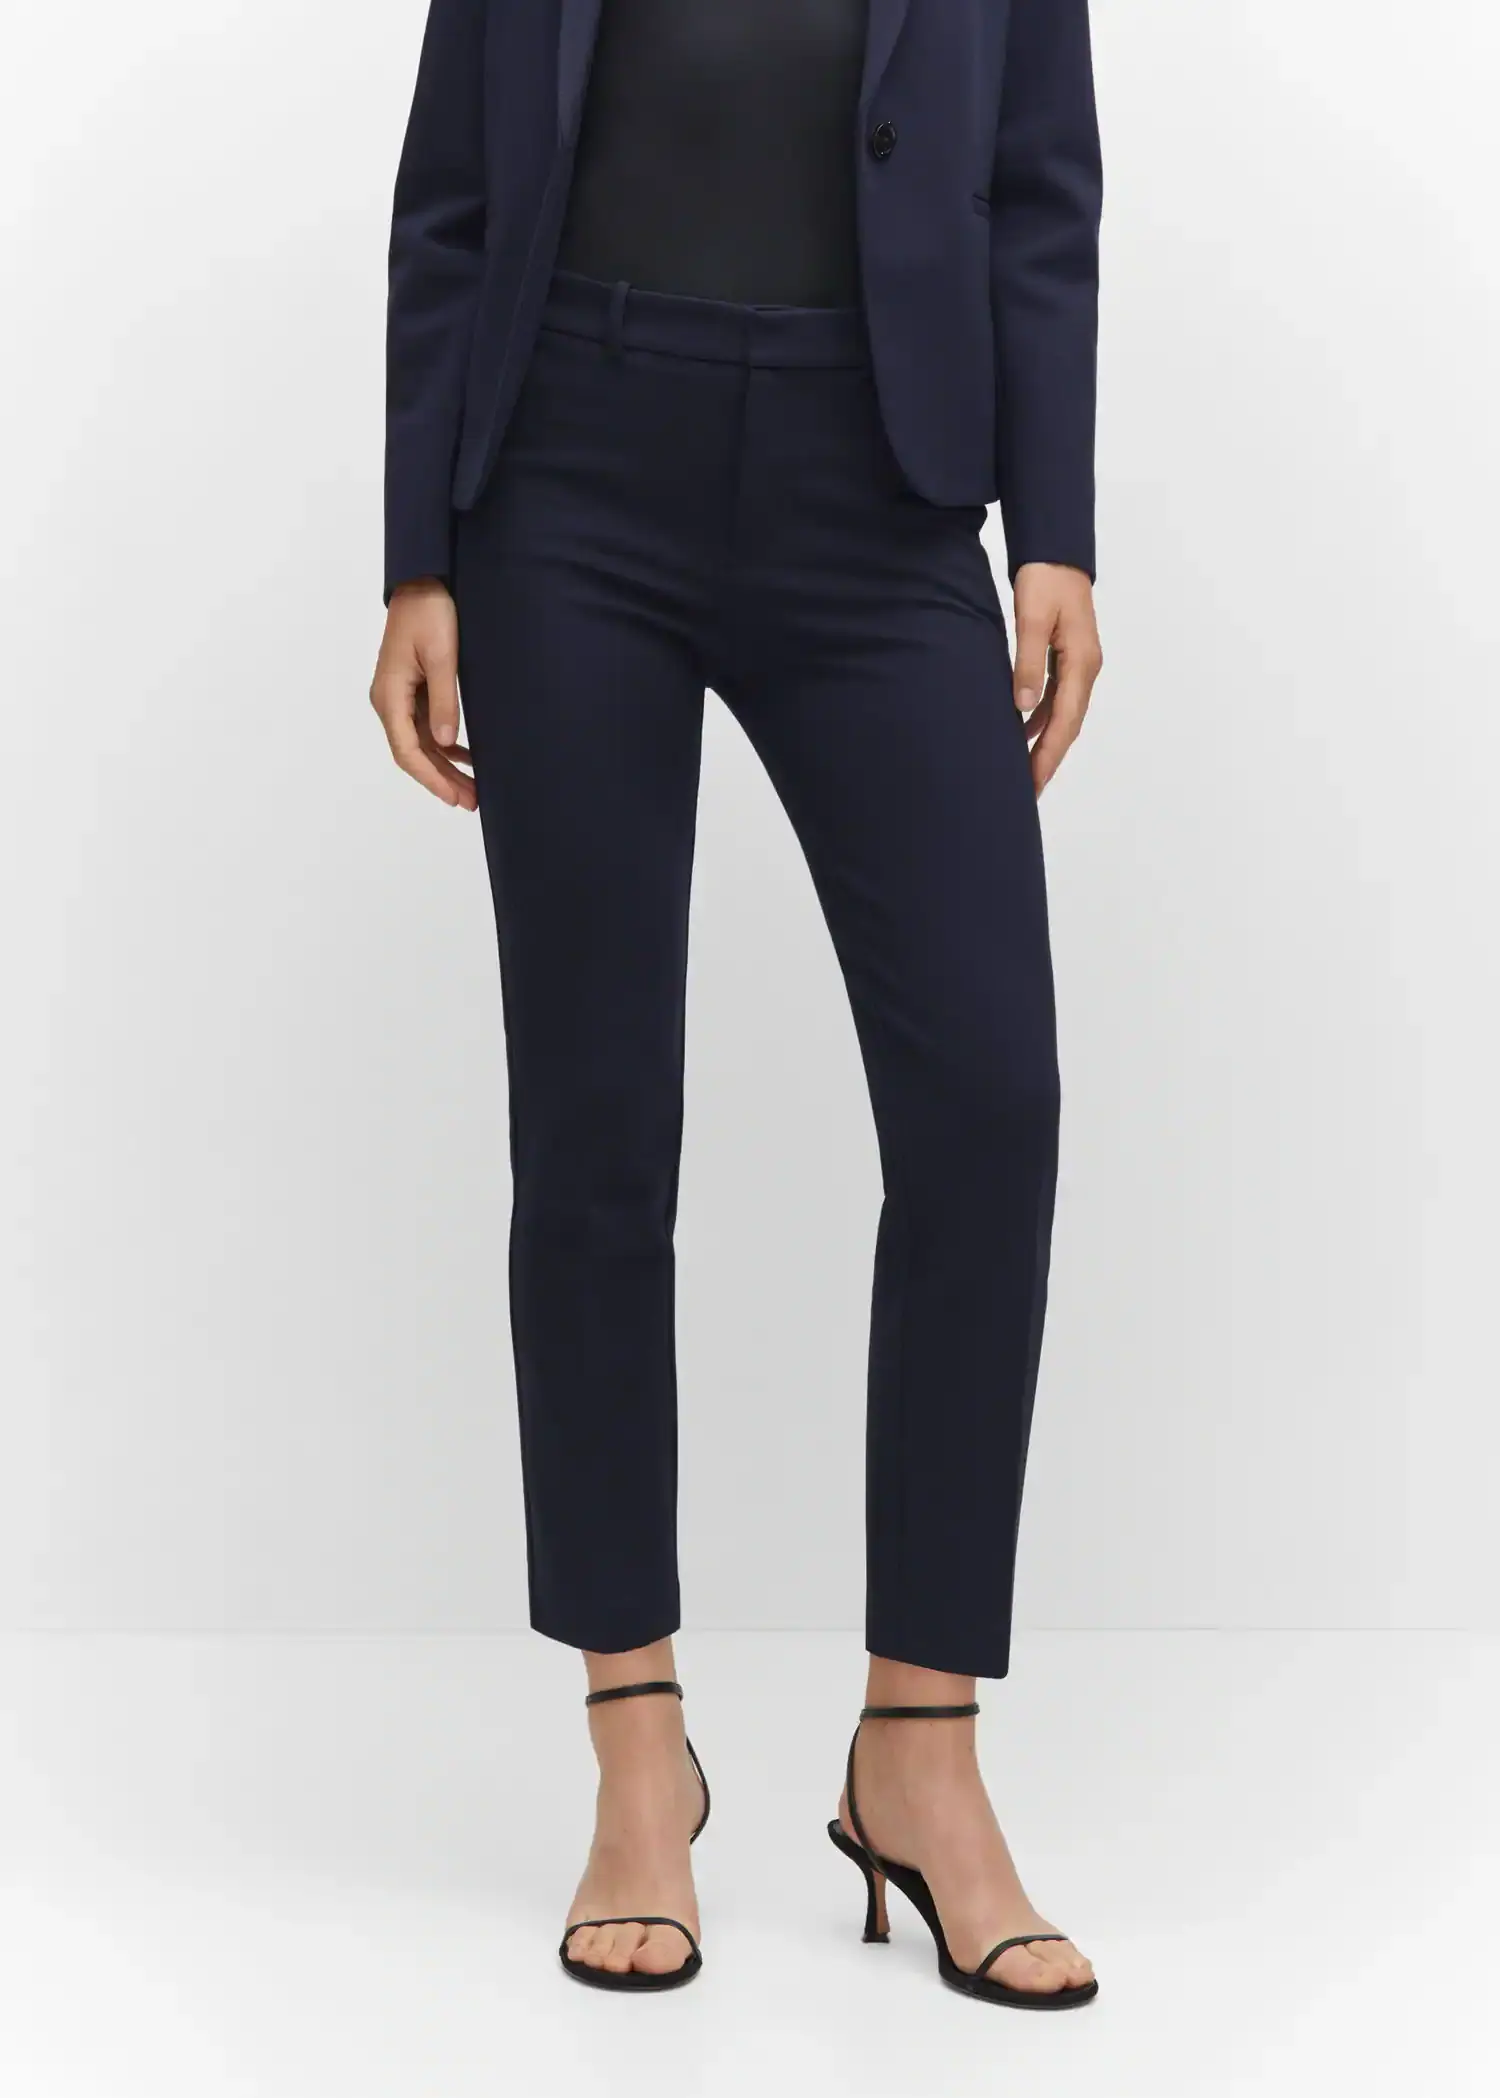 Mango Rome-knit straight pants. a woman in a black suit and black heels. 